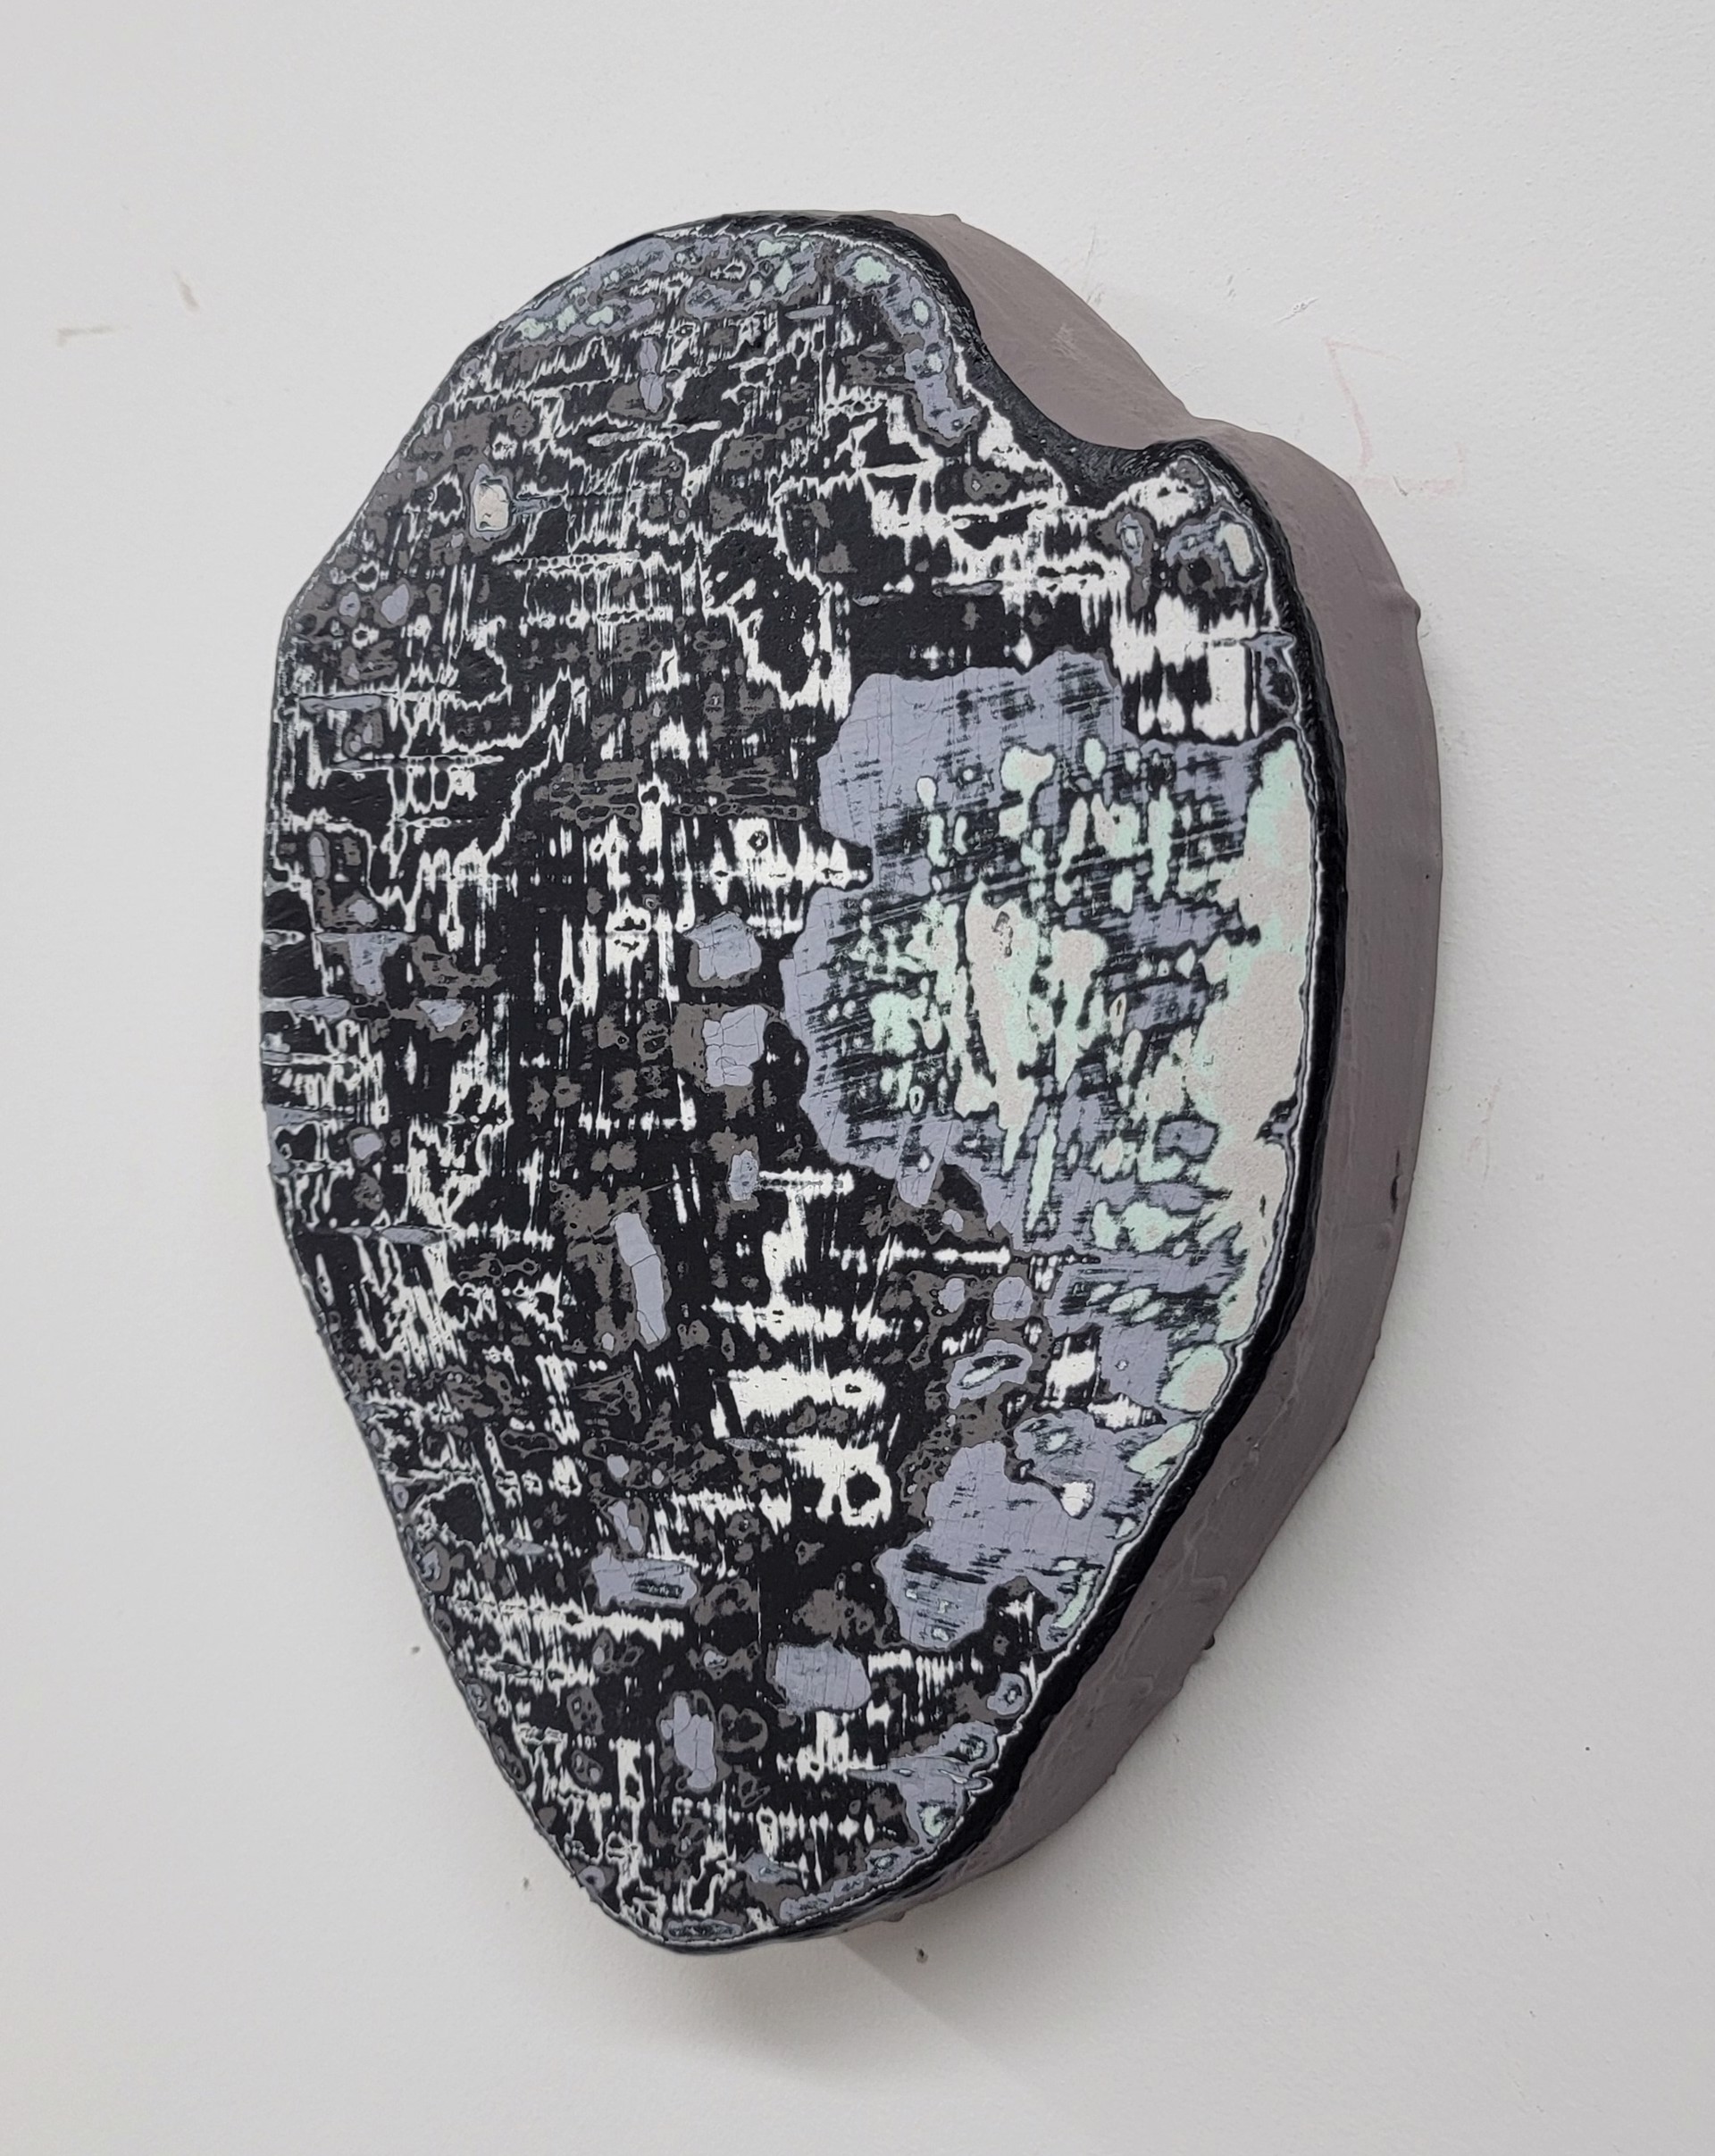 Shield 9 by Kate Mulholland